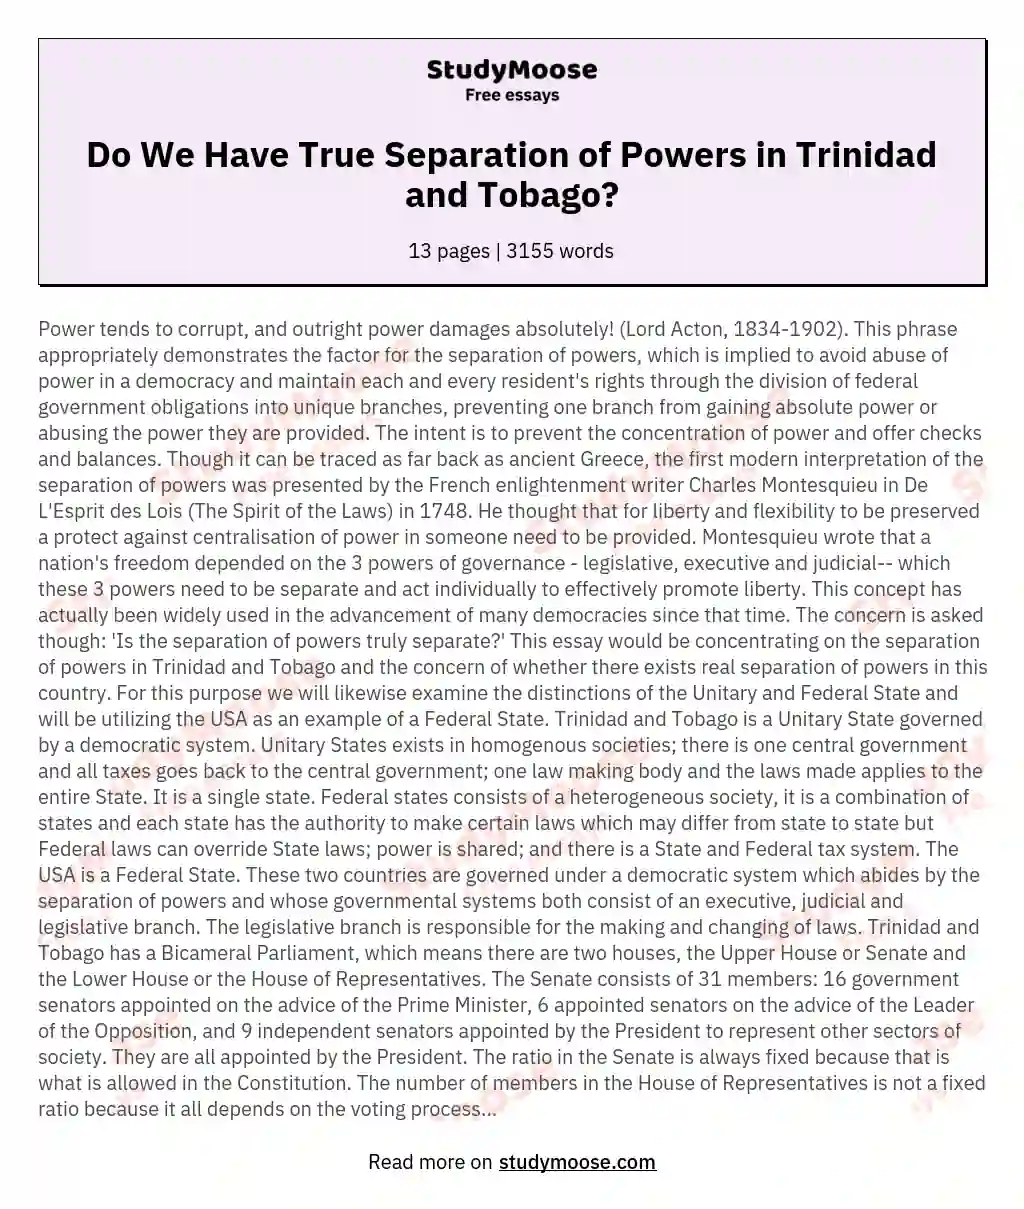 Do We Have True Separation of Powers in Trinidad and Tobago?